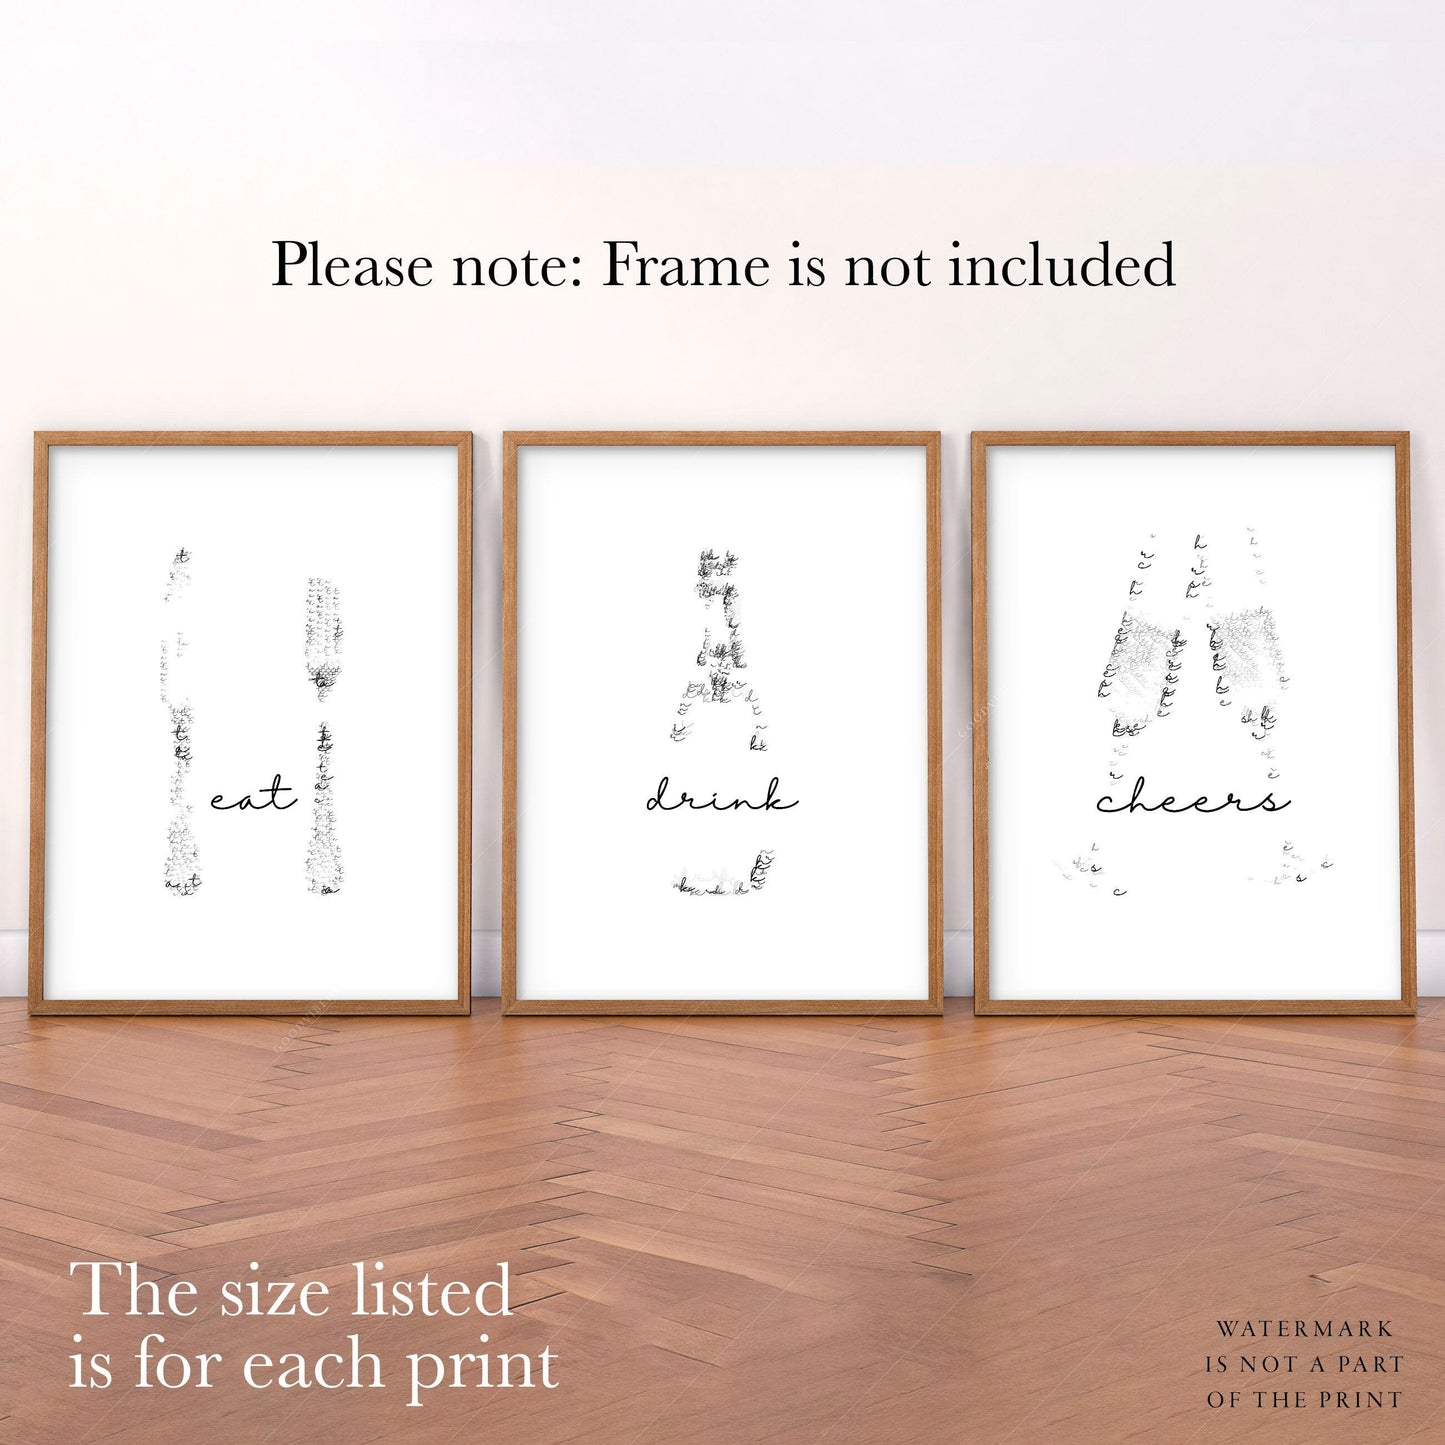 Home Poster Decor Set of 3 Cheers Sign, Cheers Print, Eat Drink Cheers, Set of 3 Prints, Dine Decor, Bar Decor, Minimalist Kitchen, Wedding Party Decor, Drink Wall Art